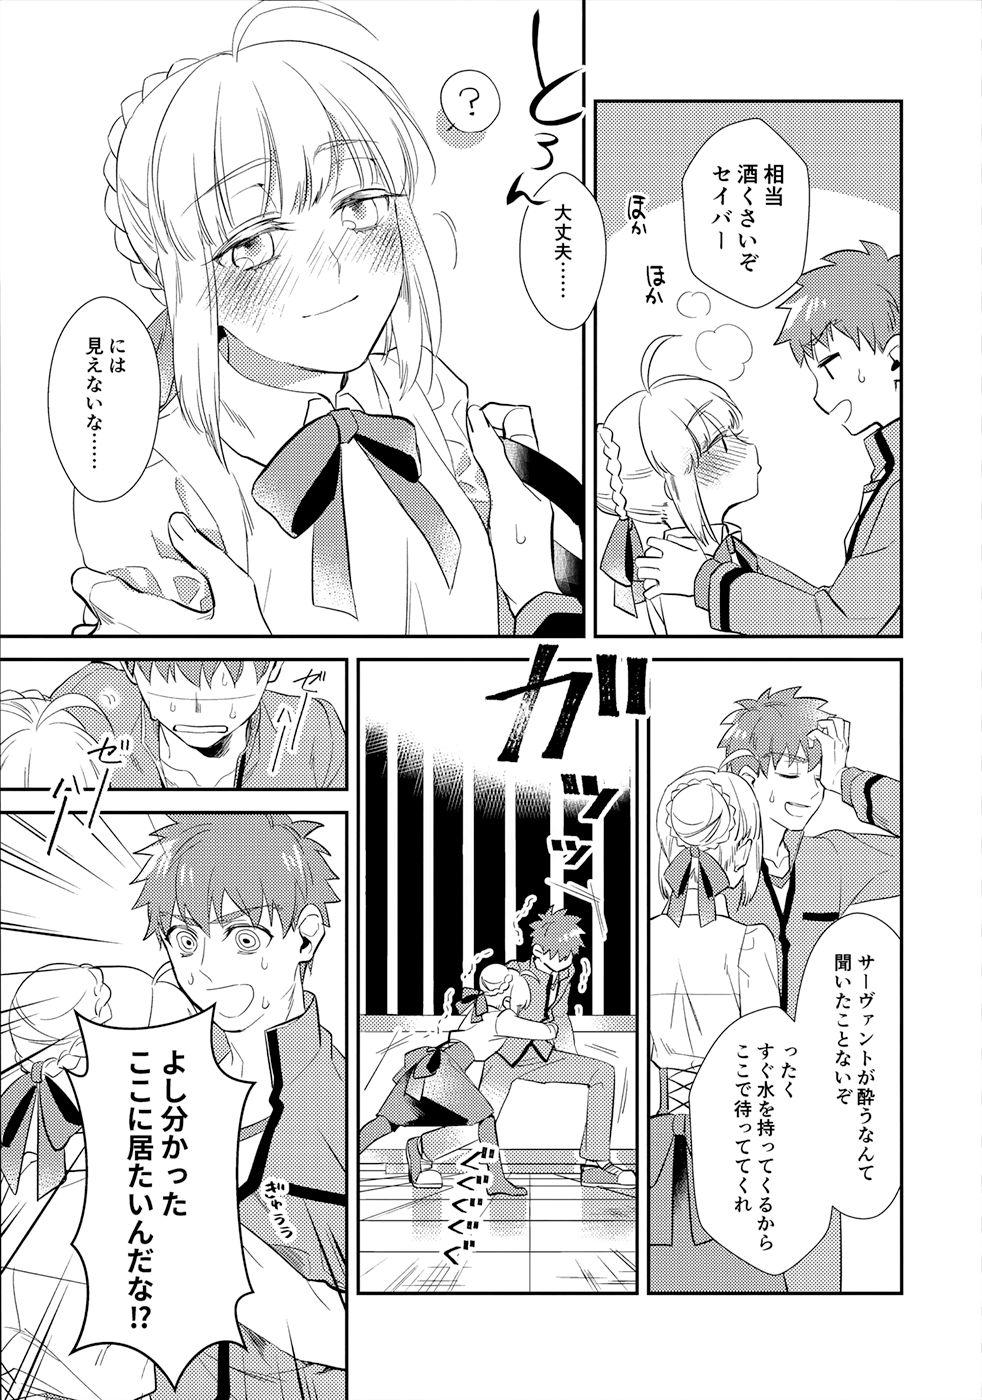 Foreplay Nonde Nomarete - Fate stay night Young Tits - Page 6